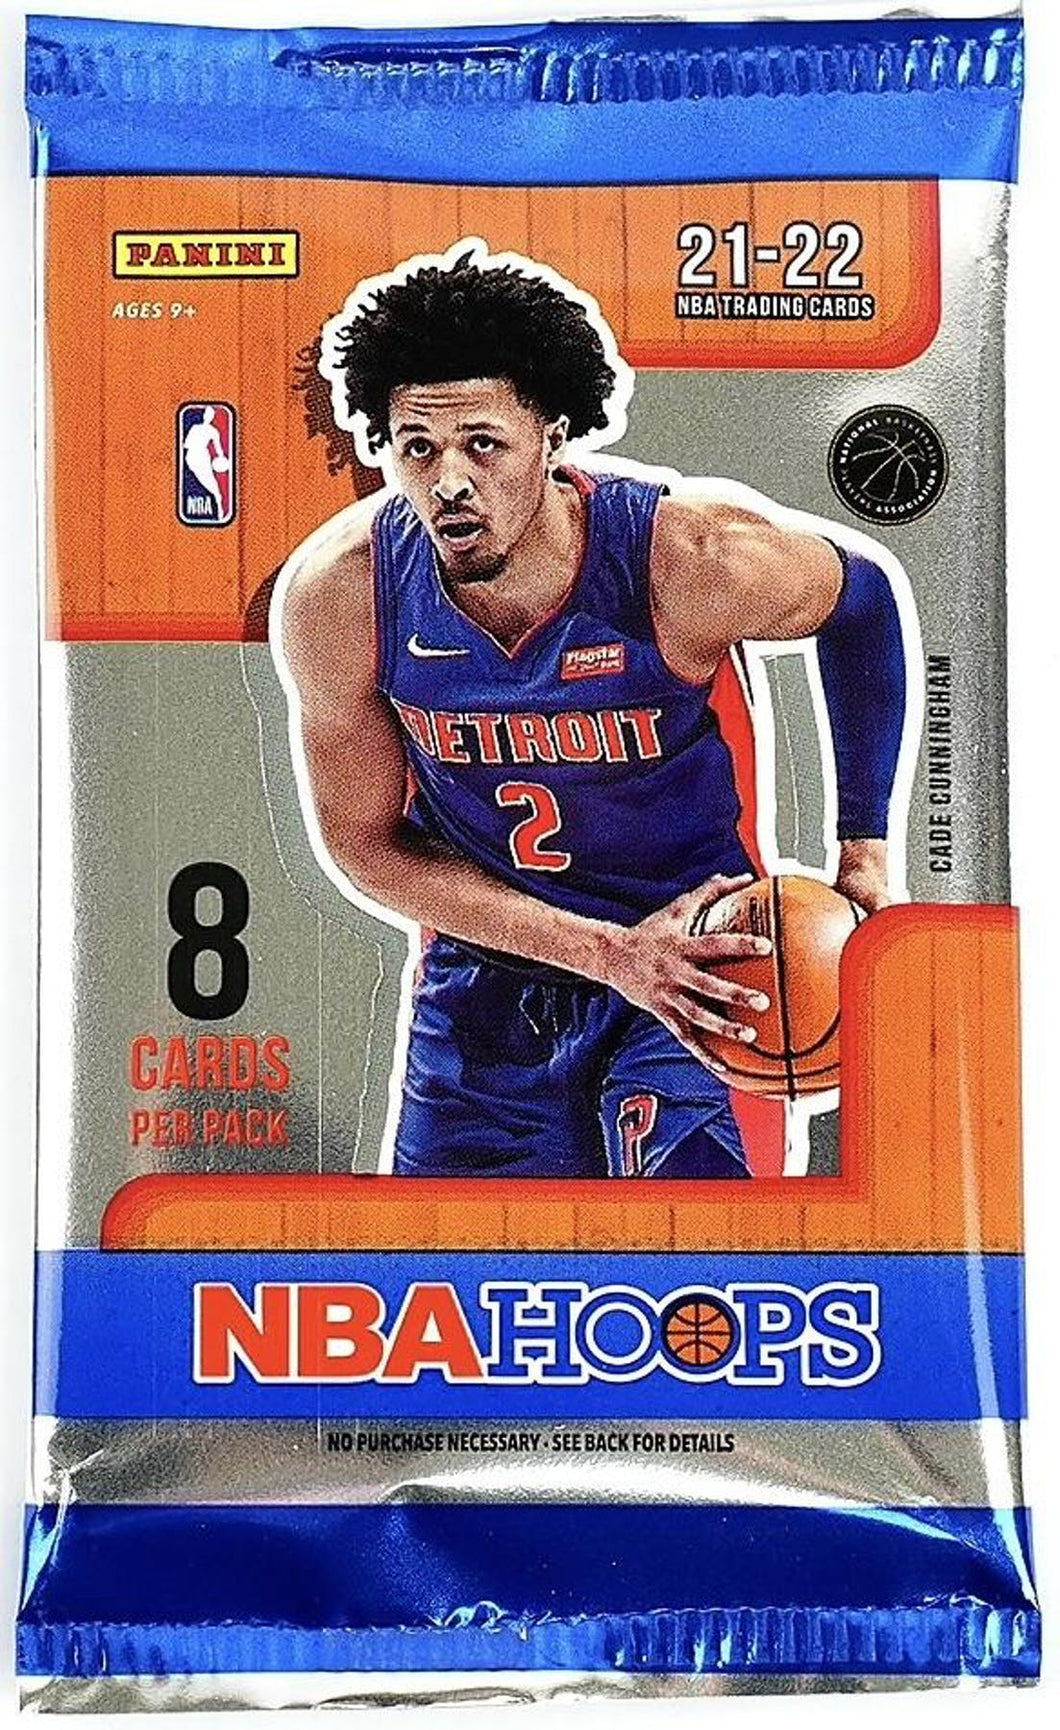 PANINI NBA HOOPS 2021-22 BOOSTER PACK (FROM HOBBY BOX) x1